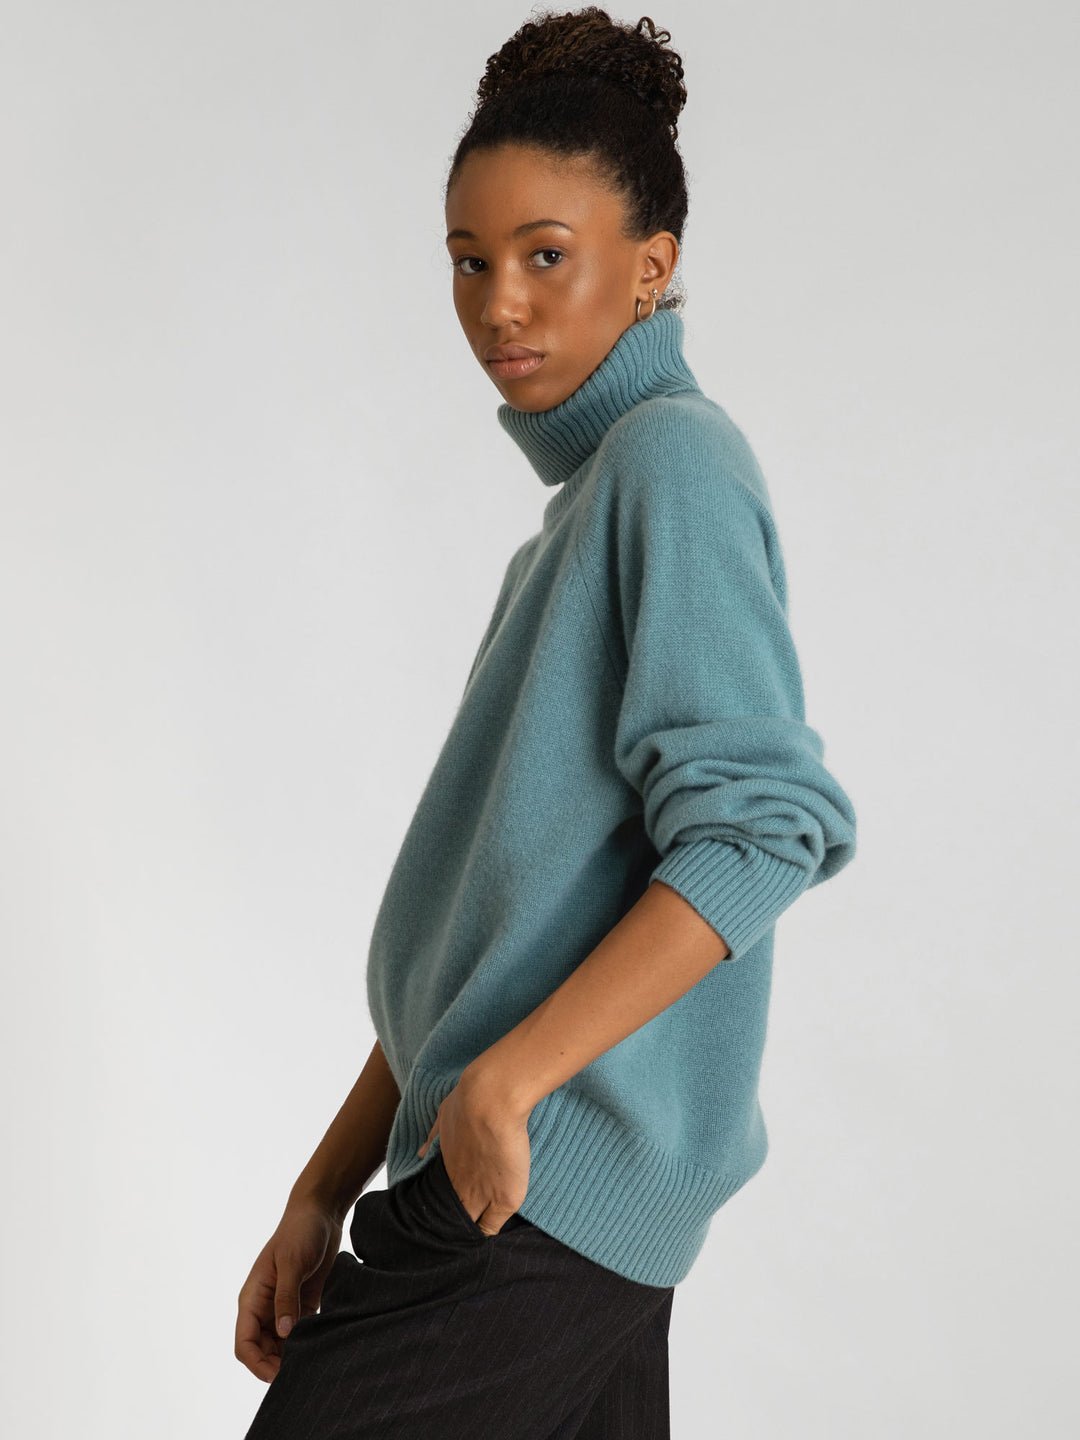 Turtle neck cashmere sweater Milano in 100% cashmere by Kashmna, color arctic blue/green. Scandinavian design.